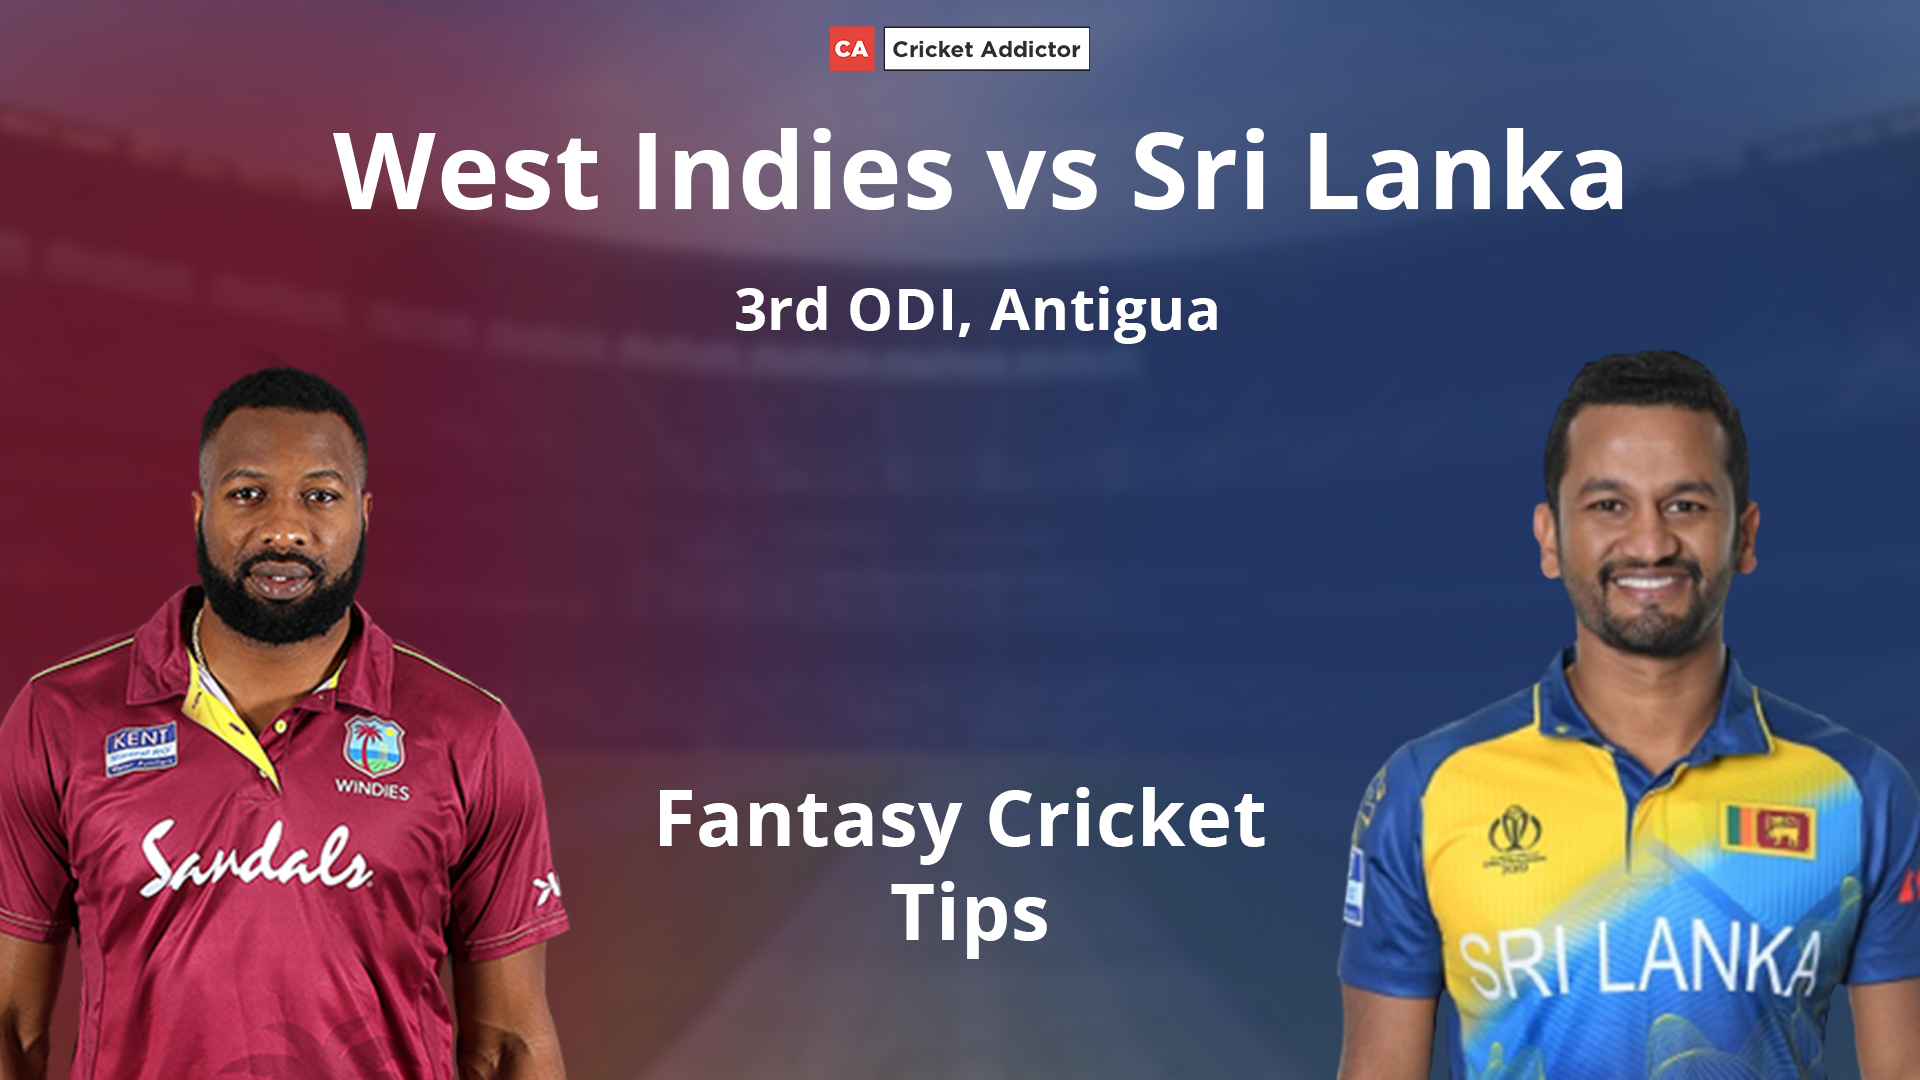 West Indies vs Sri Lanka Dream11 Prediction, Fantasy Cricket Tips, Playing XI, Pitch Report, Dream11 Team, and Injury Update.